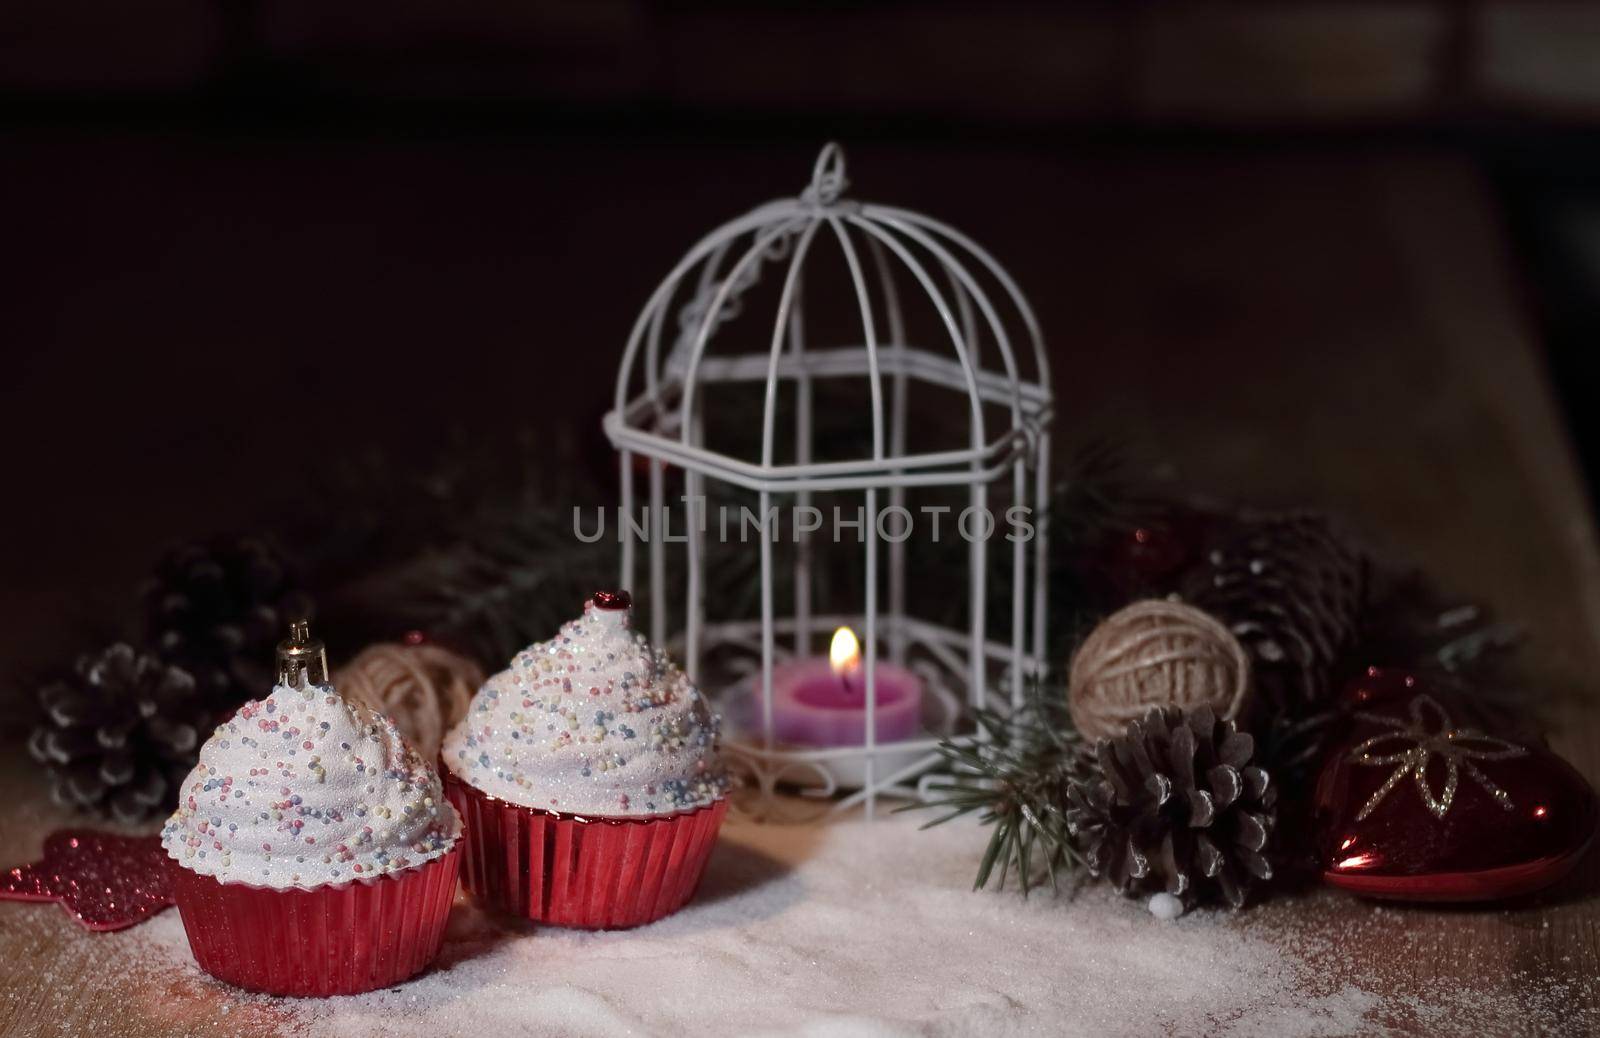 cupcakes,Christmas candle and Christmas decorations on wooden ba by SmartPhotoLab